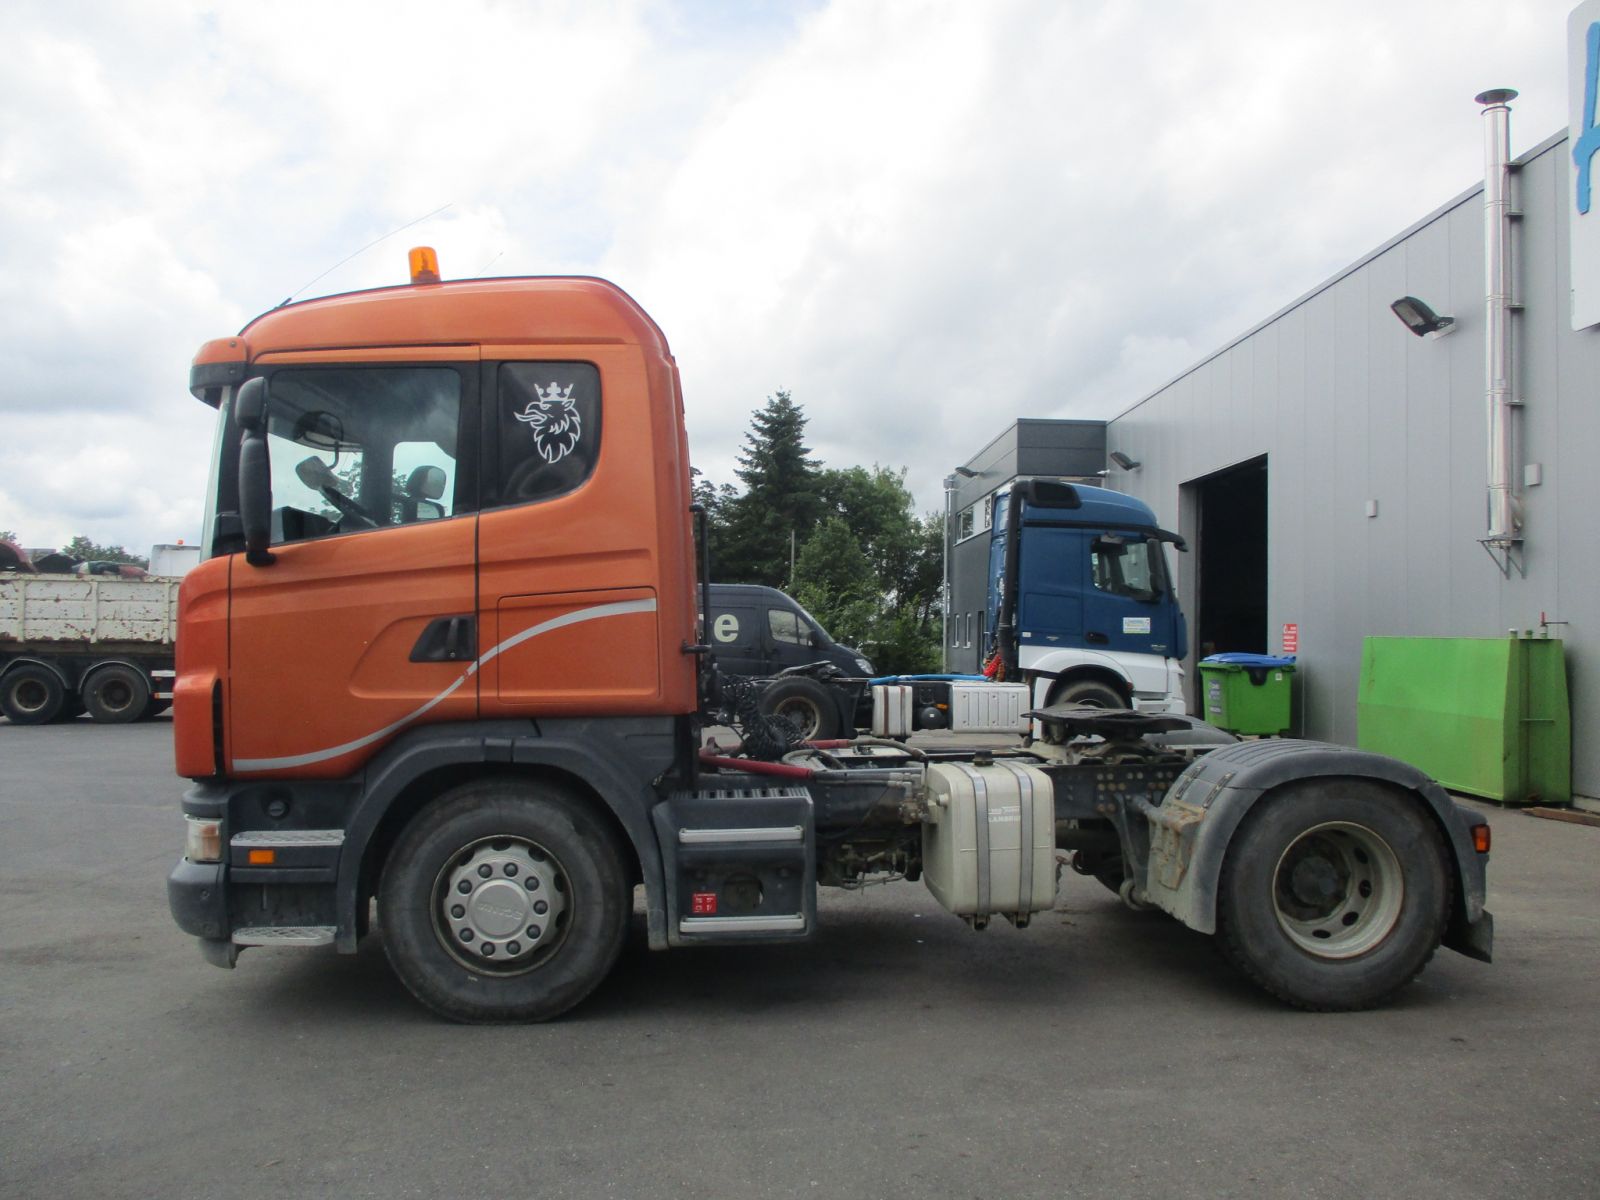 Vente occasion  Tracteur - SCANIA G440  TRACTEUR (Belgique - Europe) - Houffalize Trading s.a.